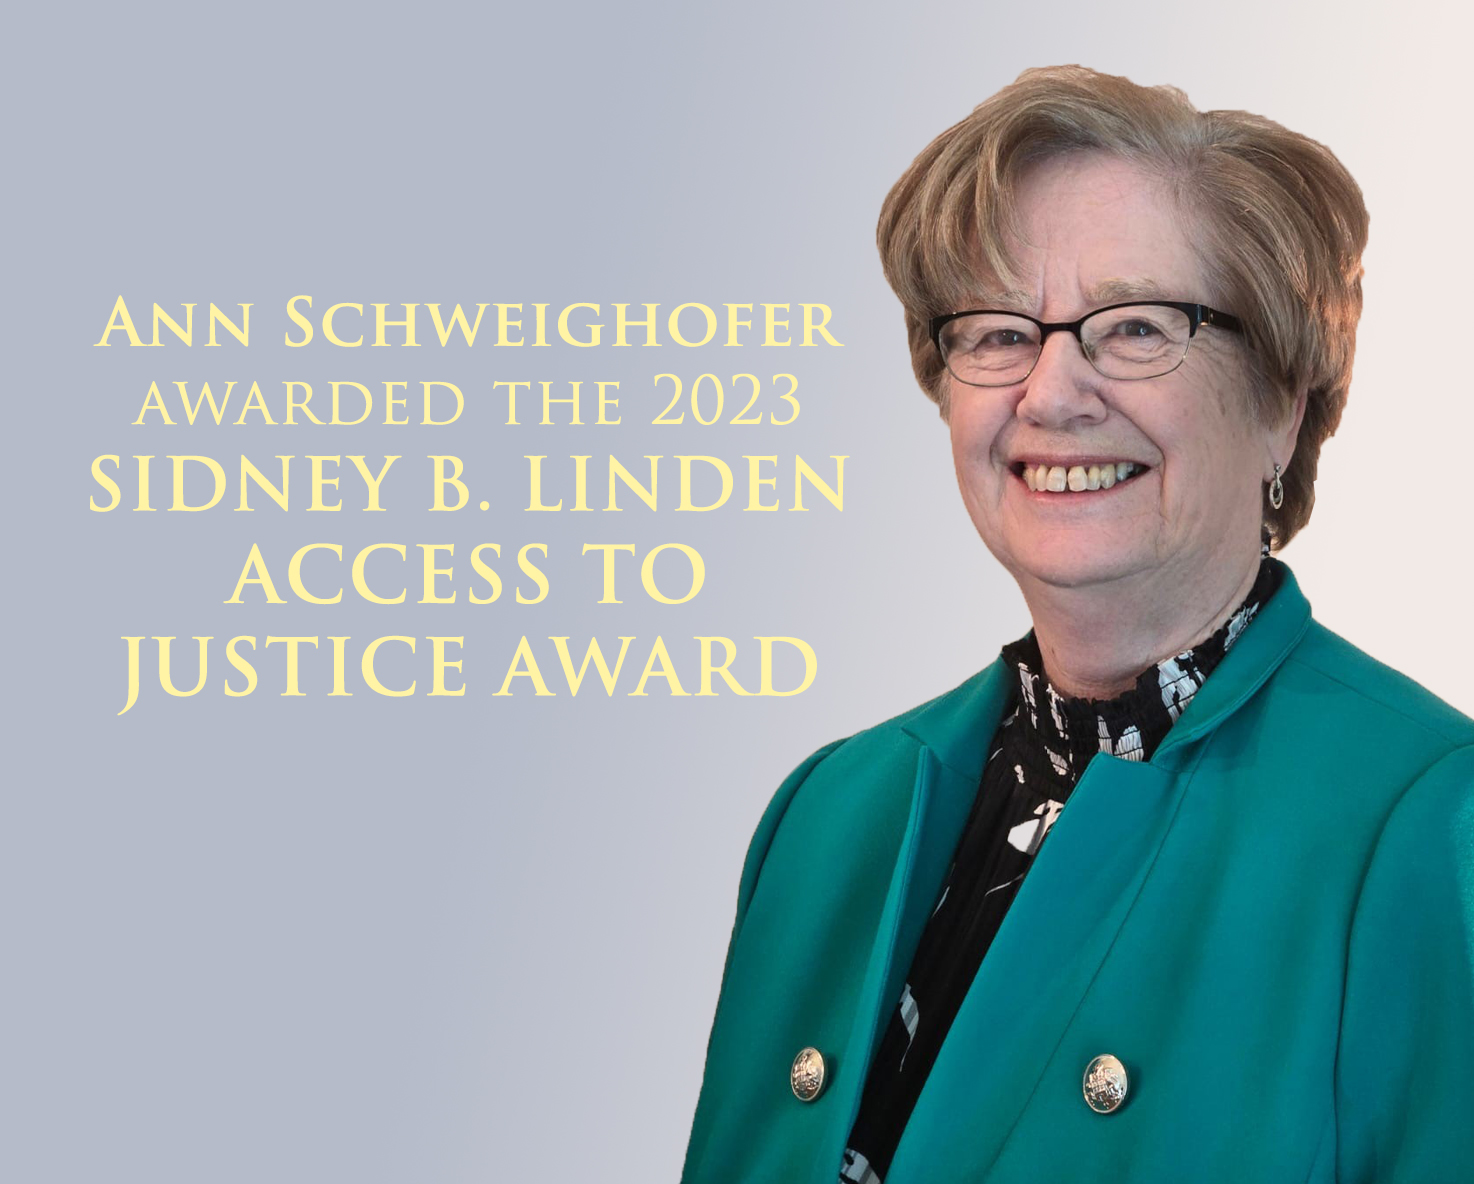 Ann Schweighofer awarded 2023 Sidney B. Linden Access to Justice Award